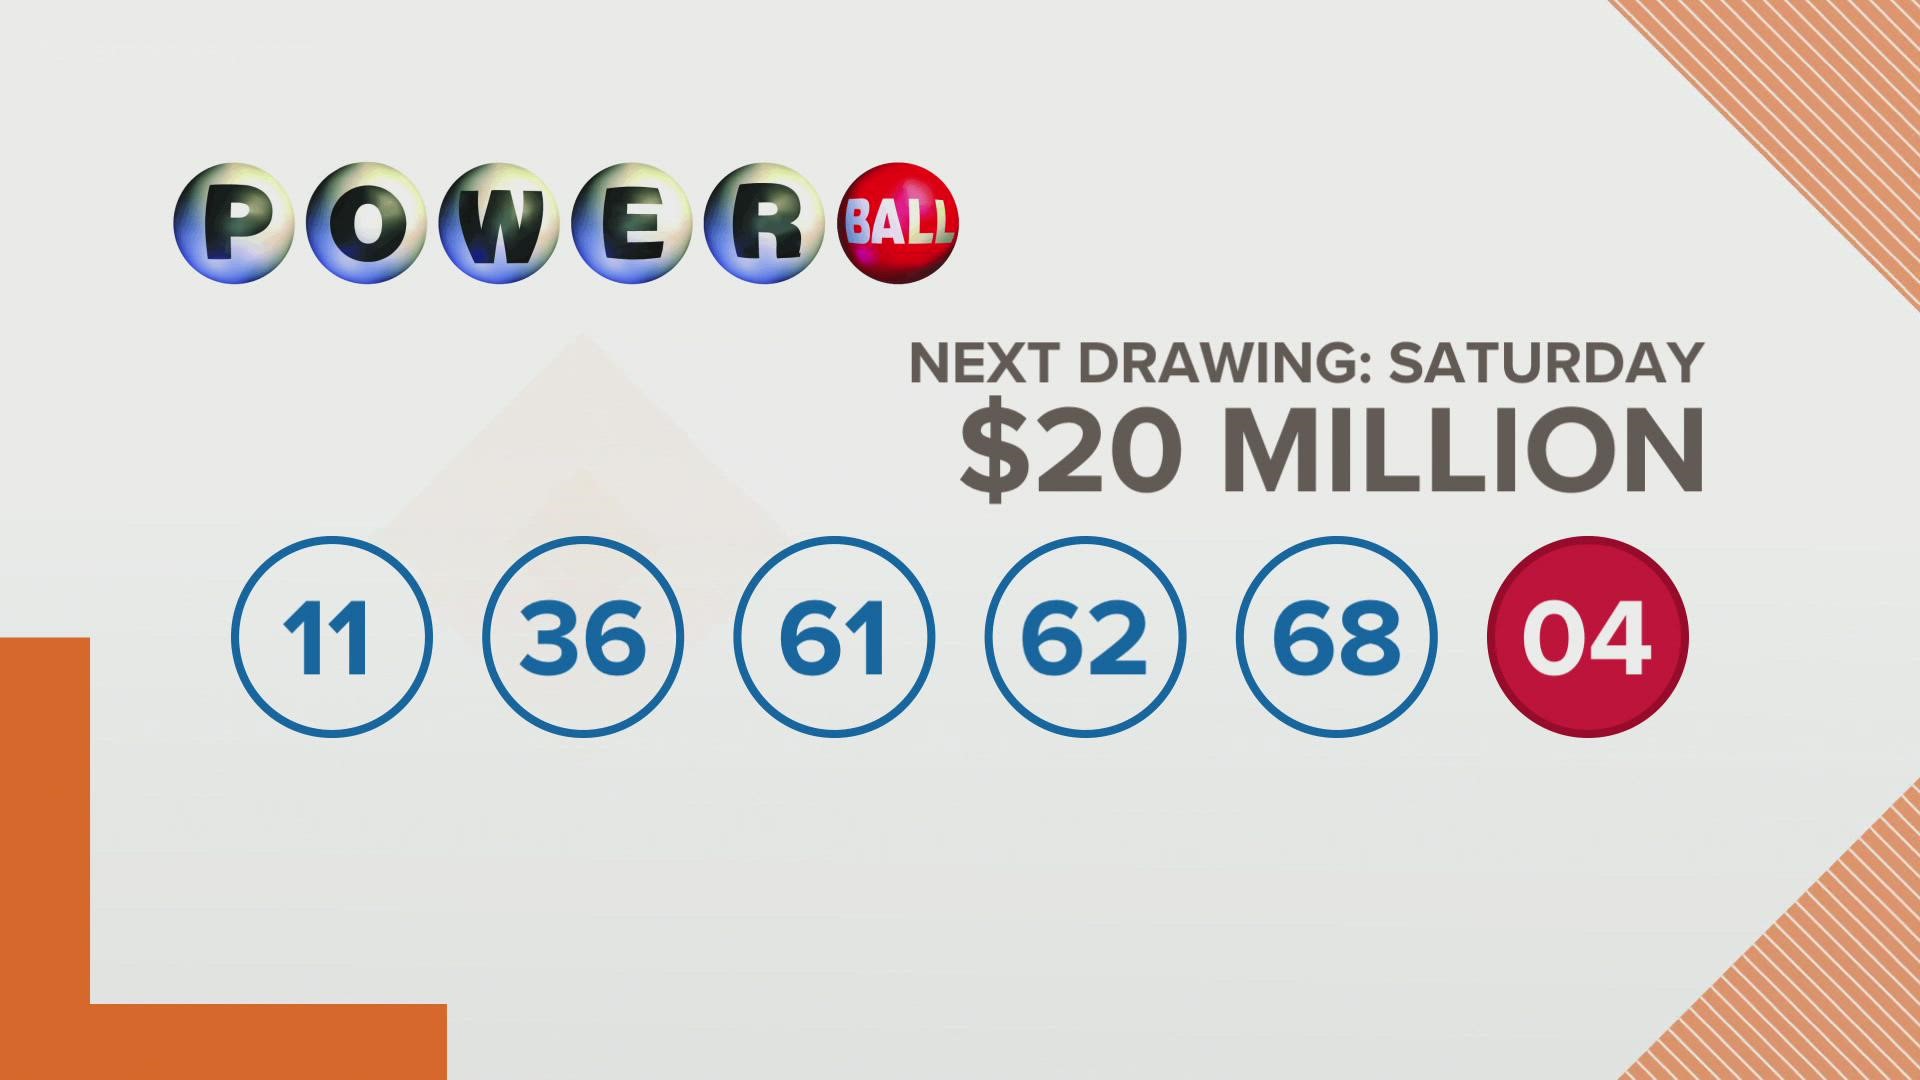 The second-largest Powerball jackpot of the year was up for grabs Wednesday, and the final amount turned out to be much higher than anticipated.